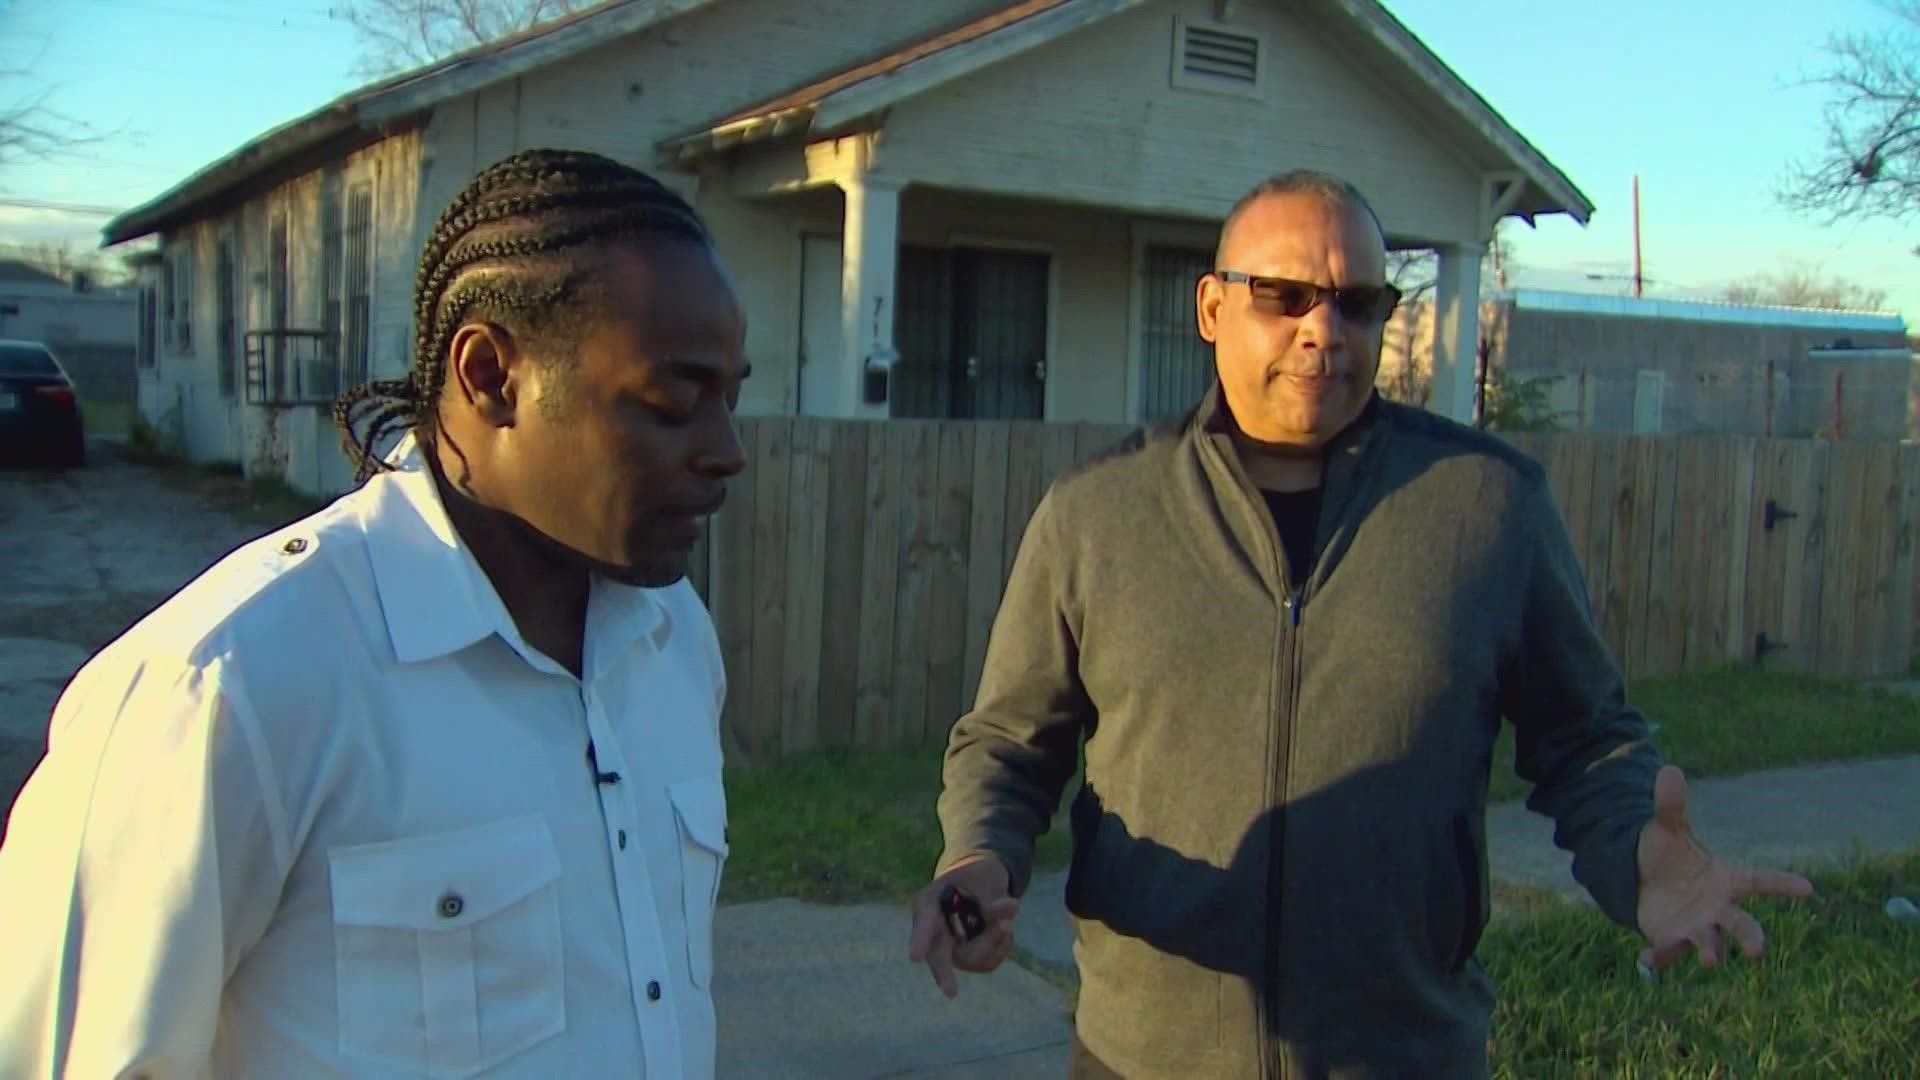 A retiring Dallas Police officer shares an unlikely friendship with a former gang member.